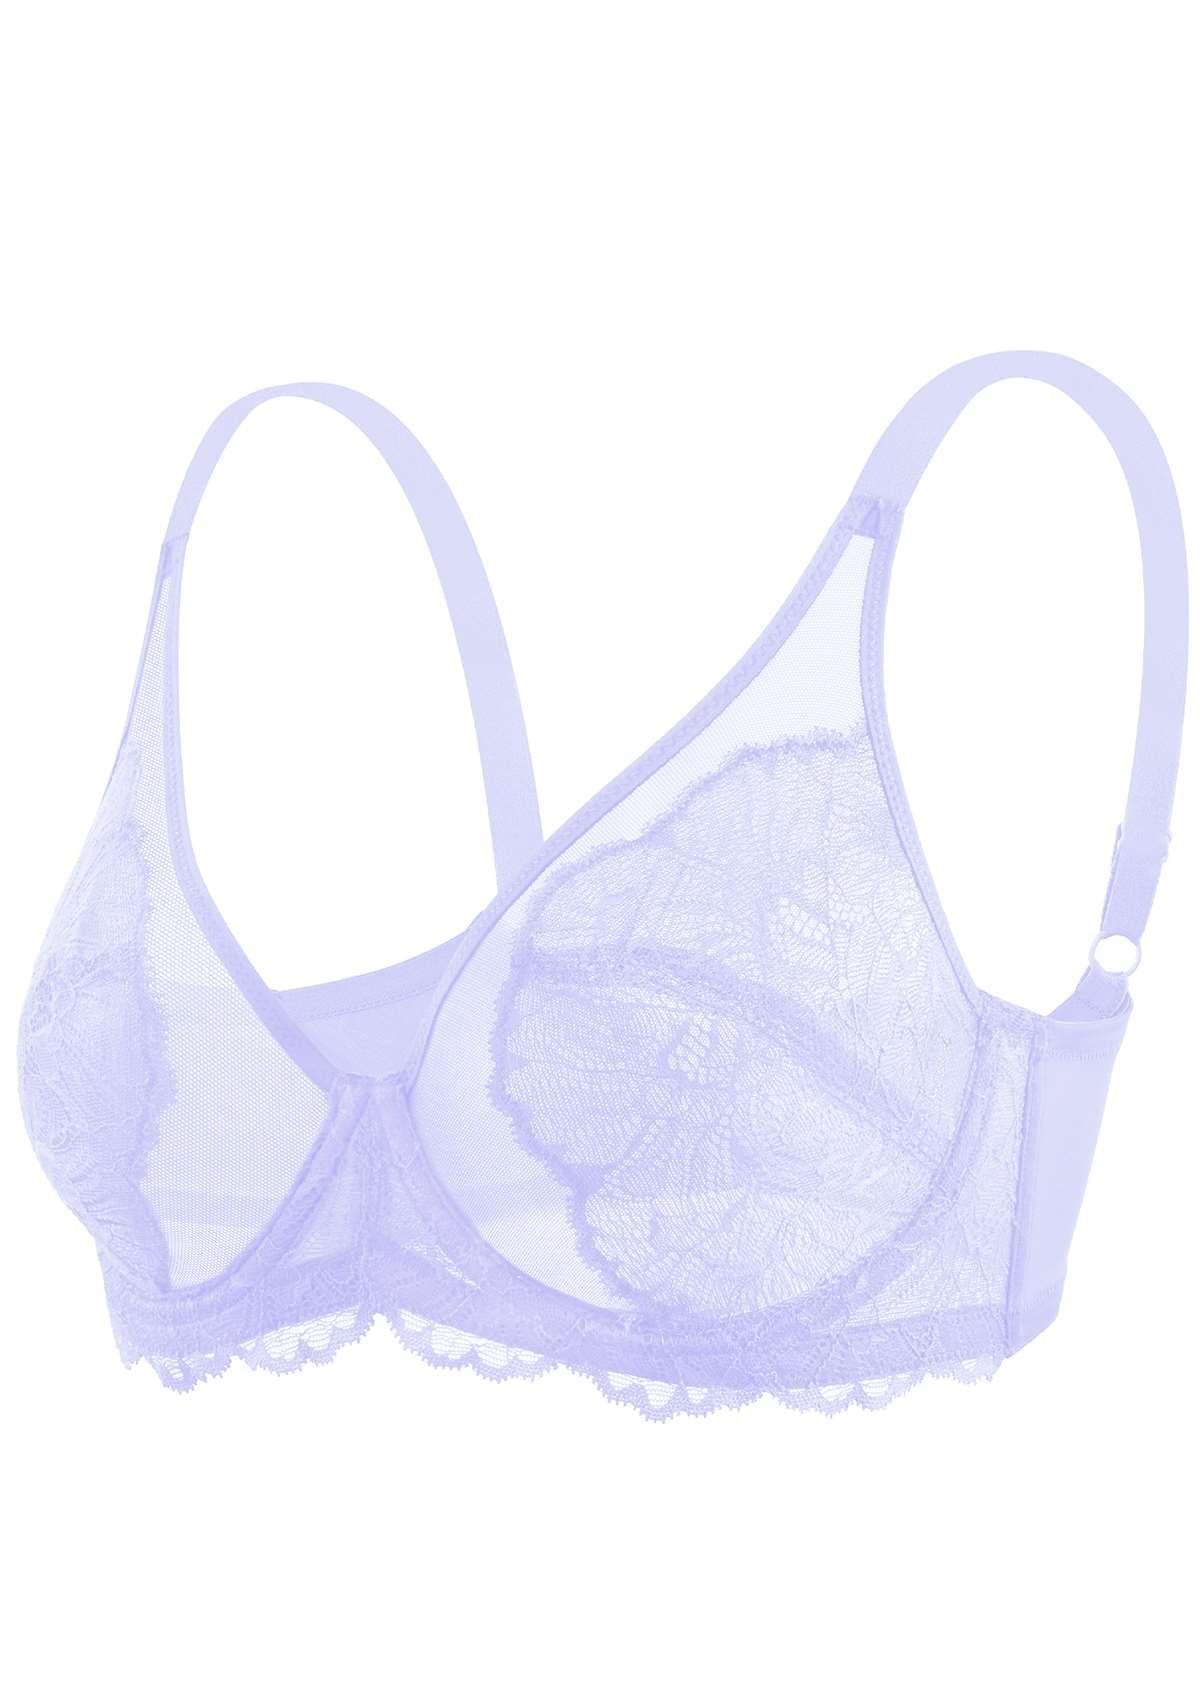 HSIA Blossom Transparent Lace Bra: Plus Size Wired Back Smoothing Bra - Light Purple / 36 / C